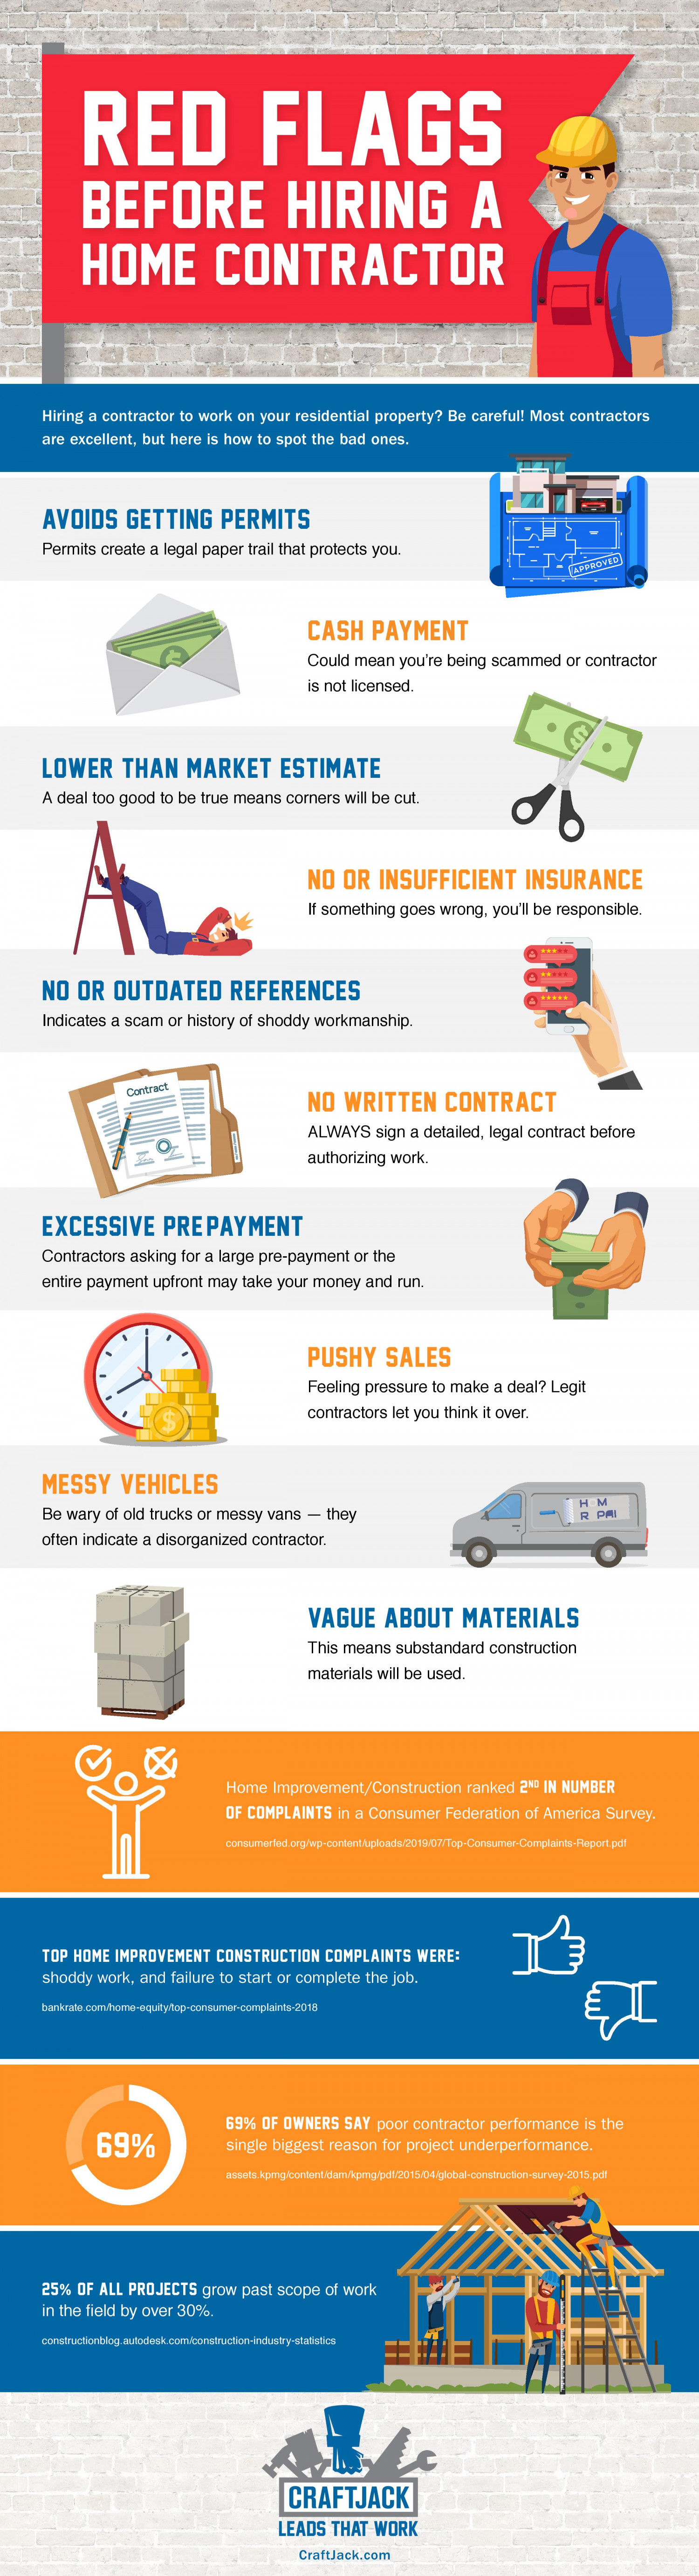 Red Flags Before Hiring a Home Contractor  Infographic